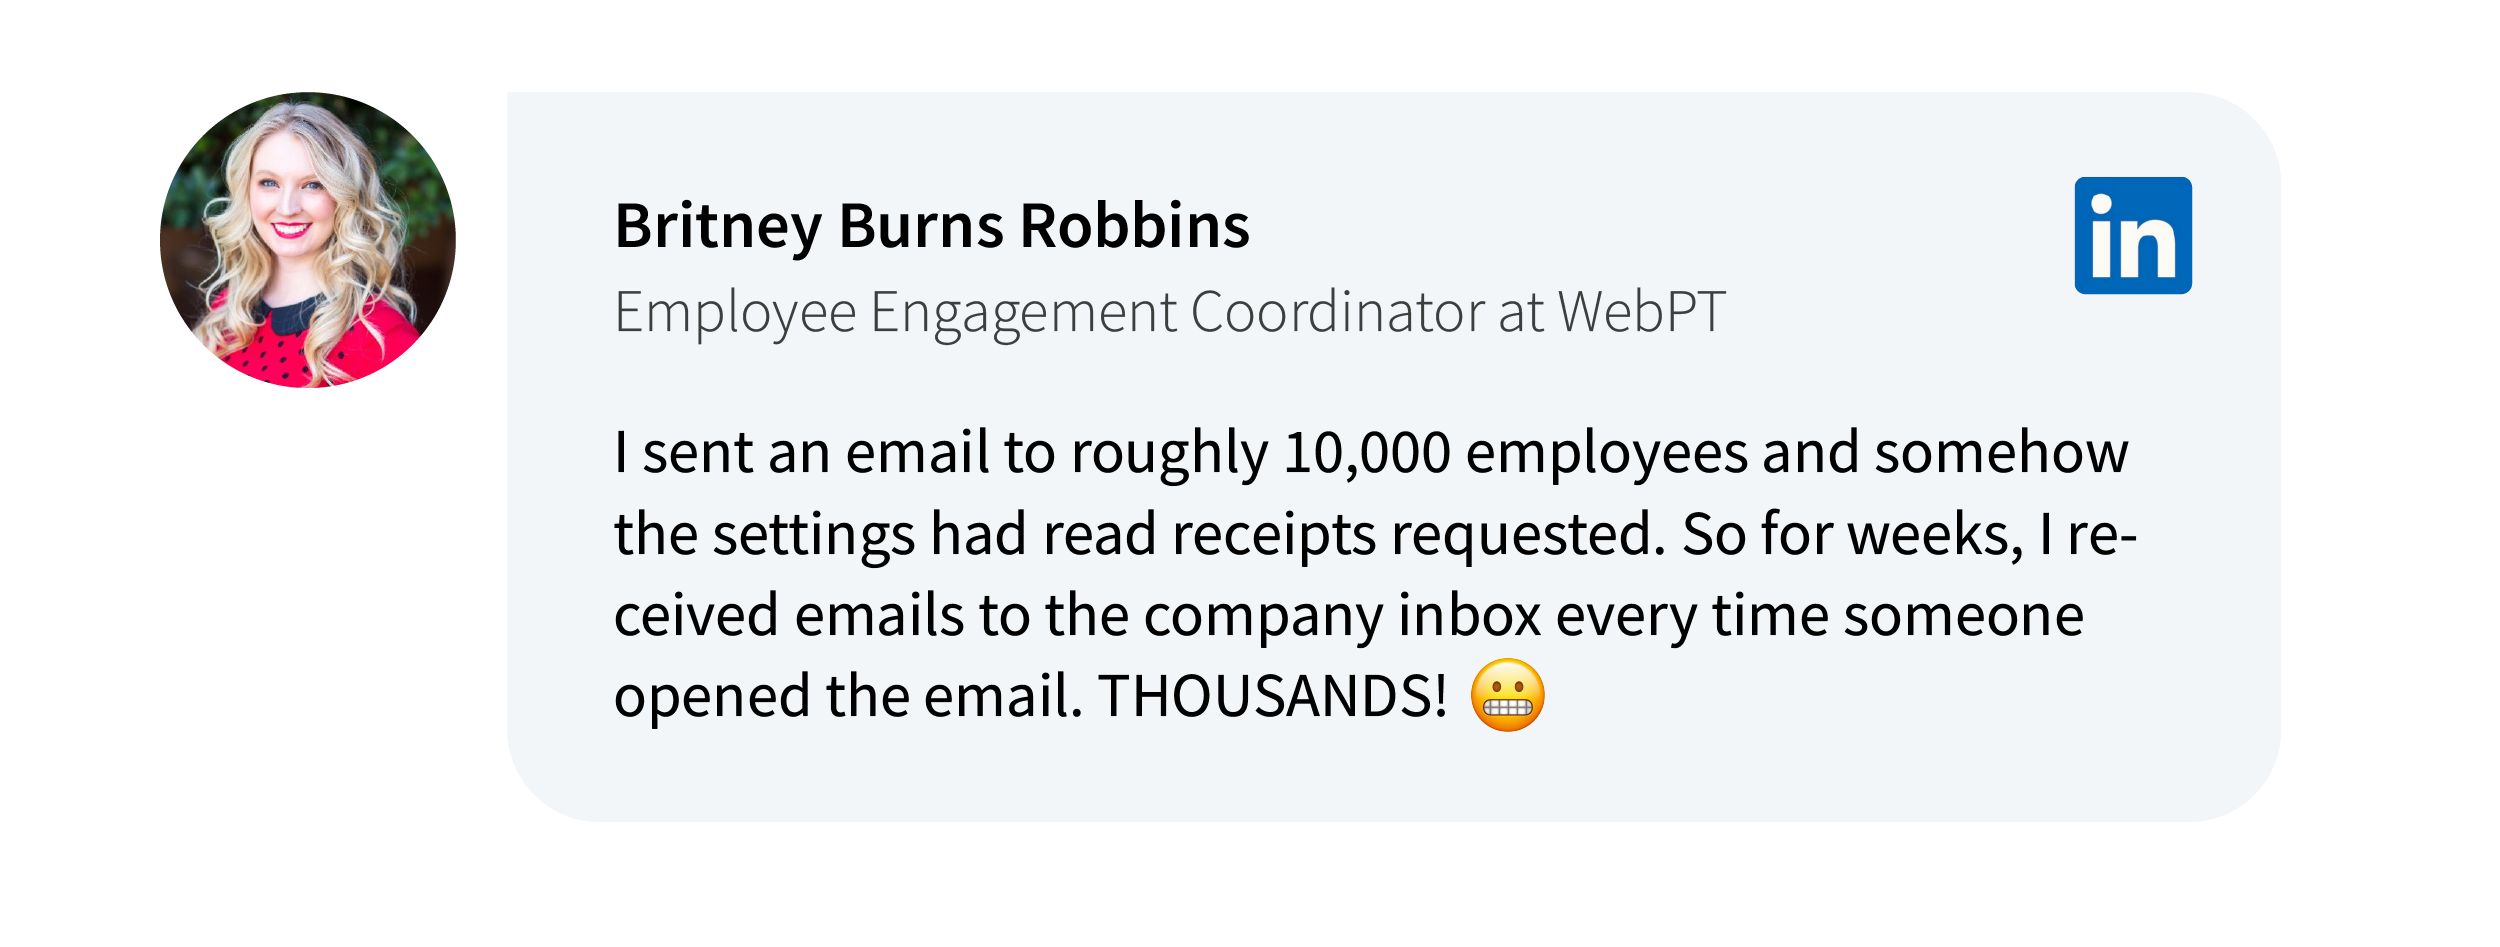 Britney Burns Robbins on LinkedIn: I sent an email to roughly 10,000 employees and somehow the settings had read receipts requested. So for weeks, I received emails to the company inbox every time someone opened the email. THOUSANDS!  